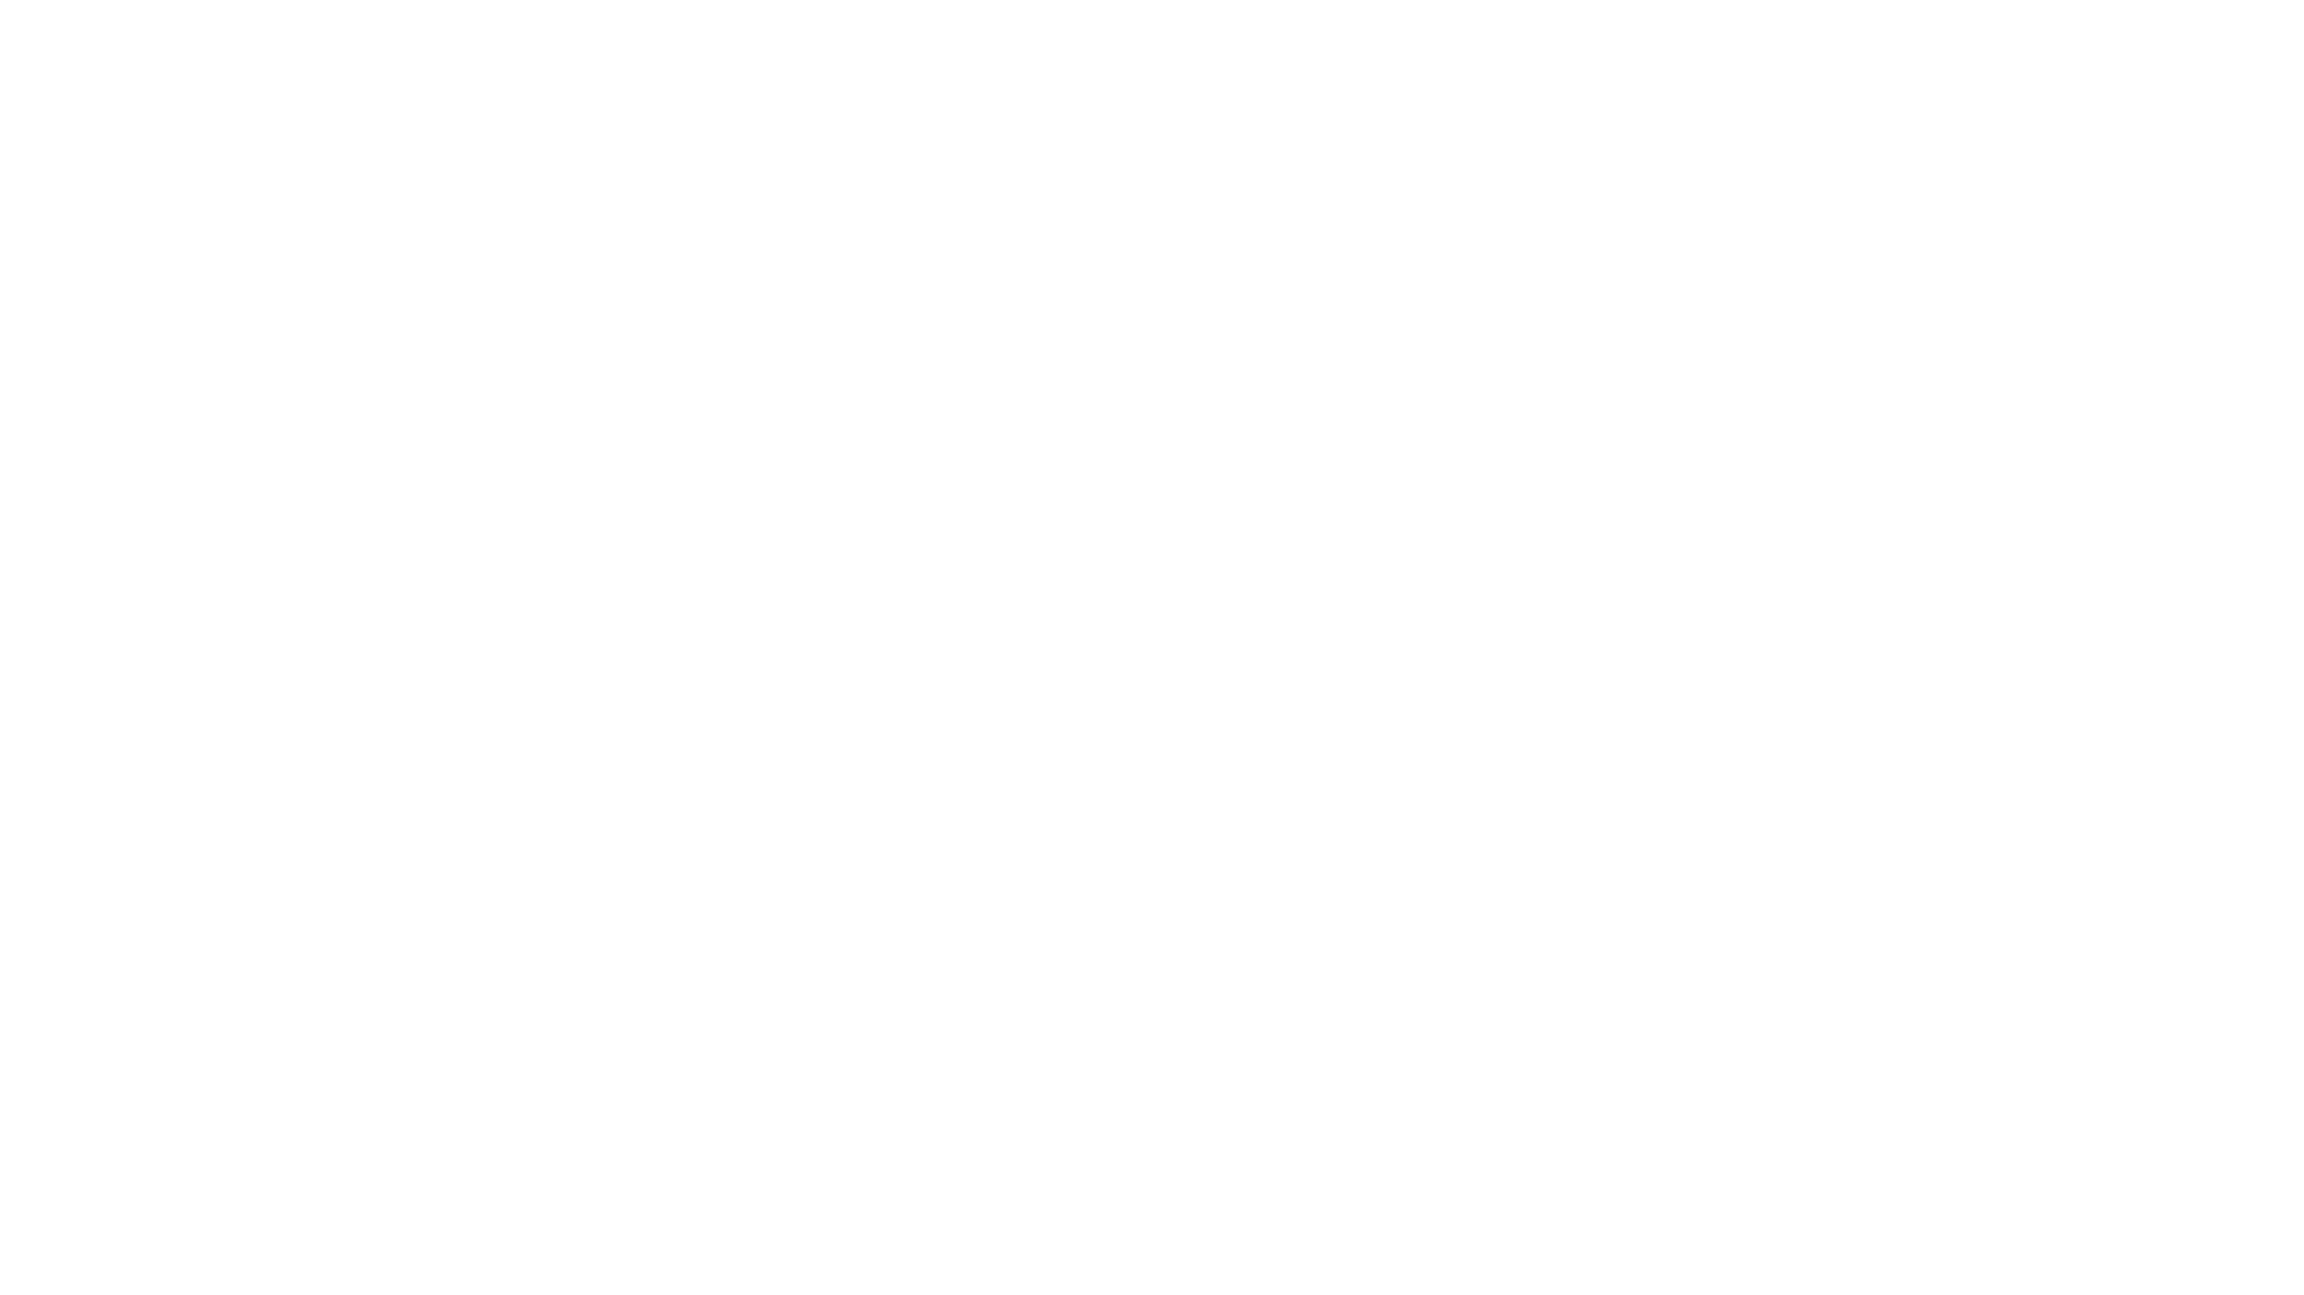 The Strology Show